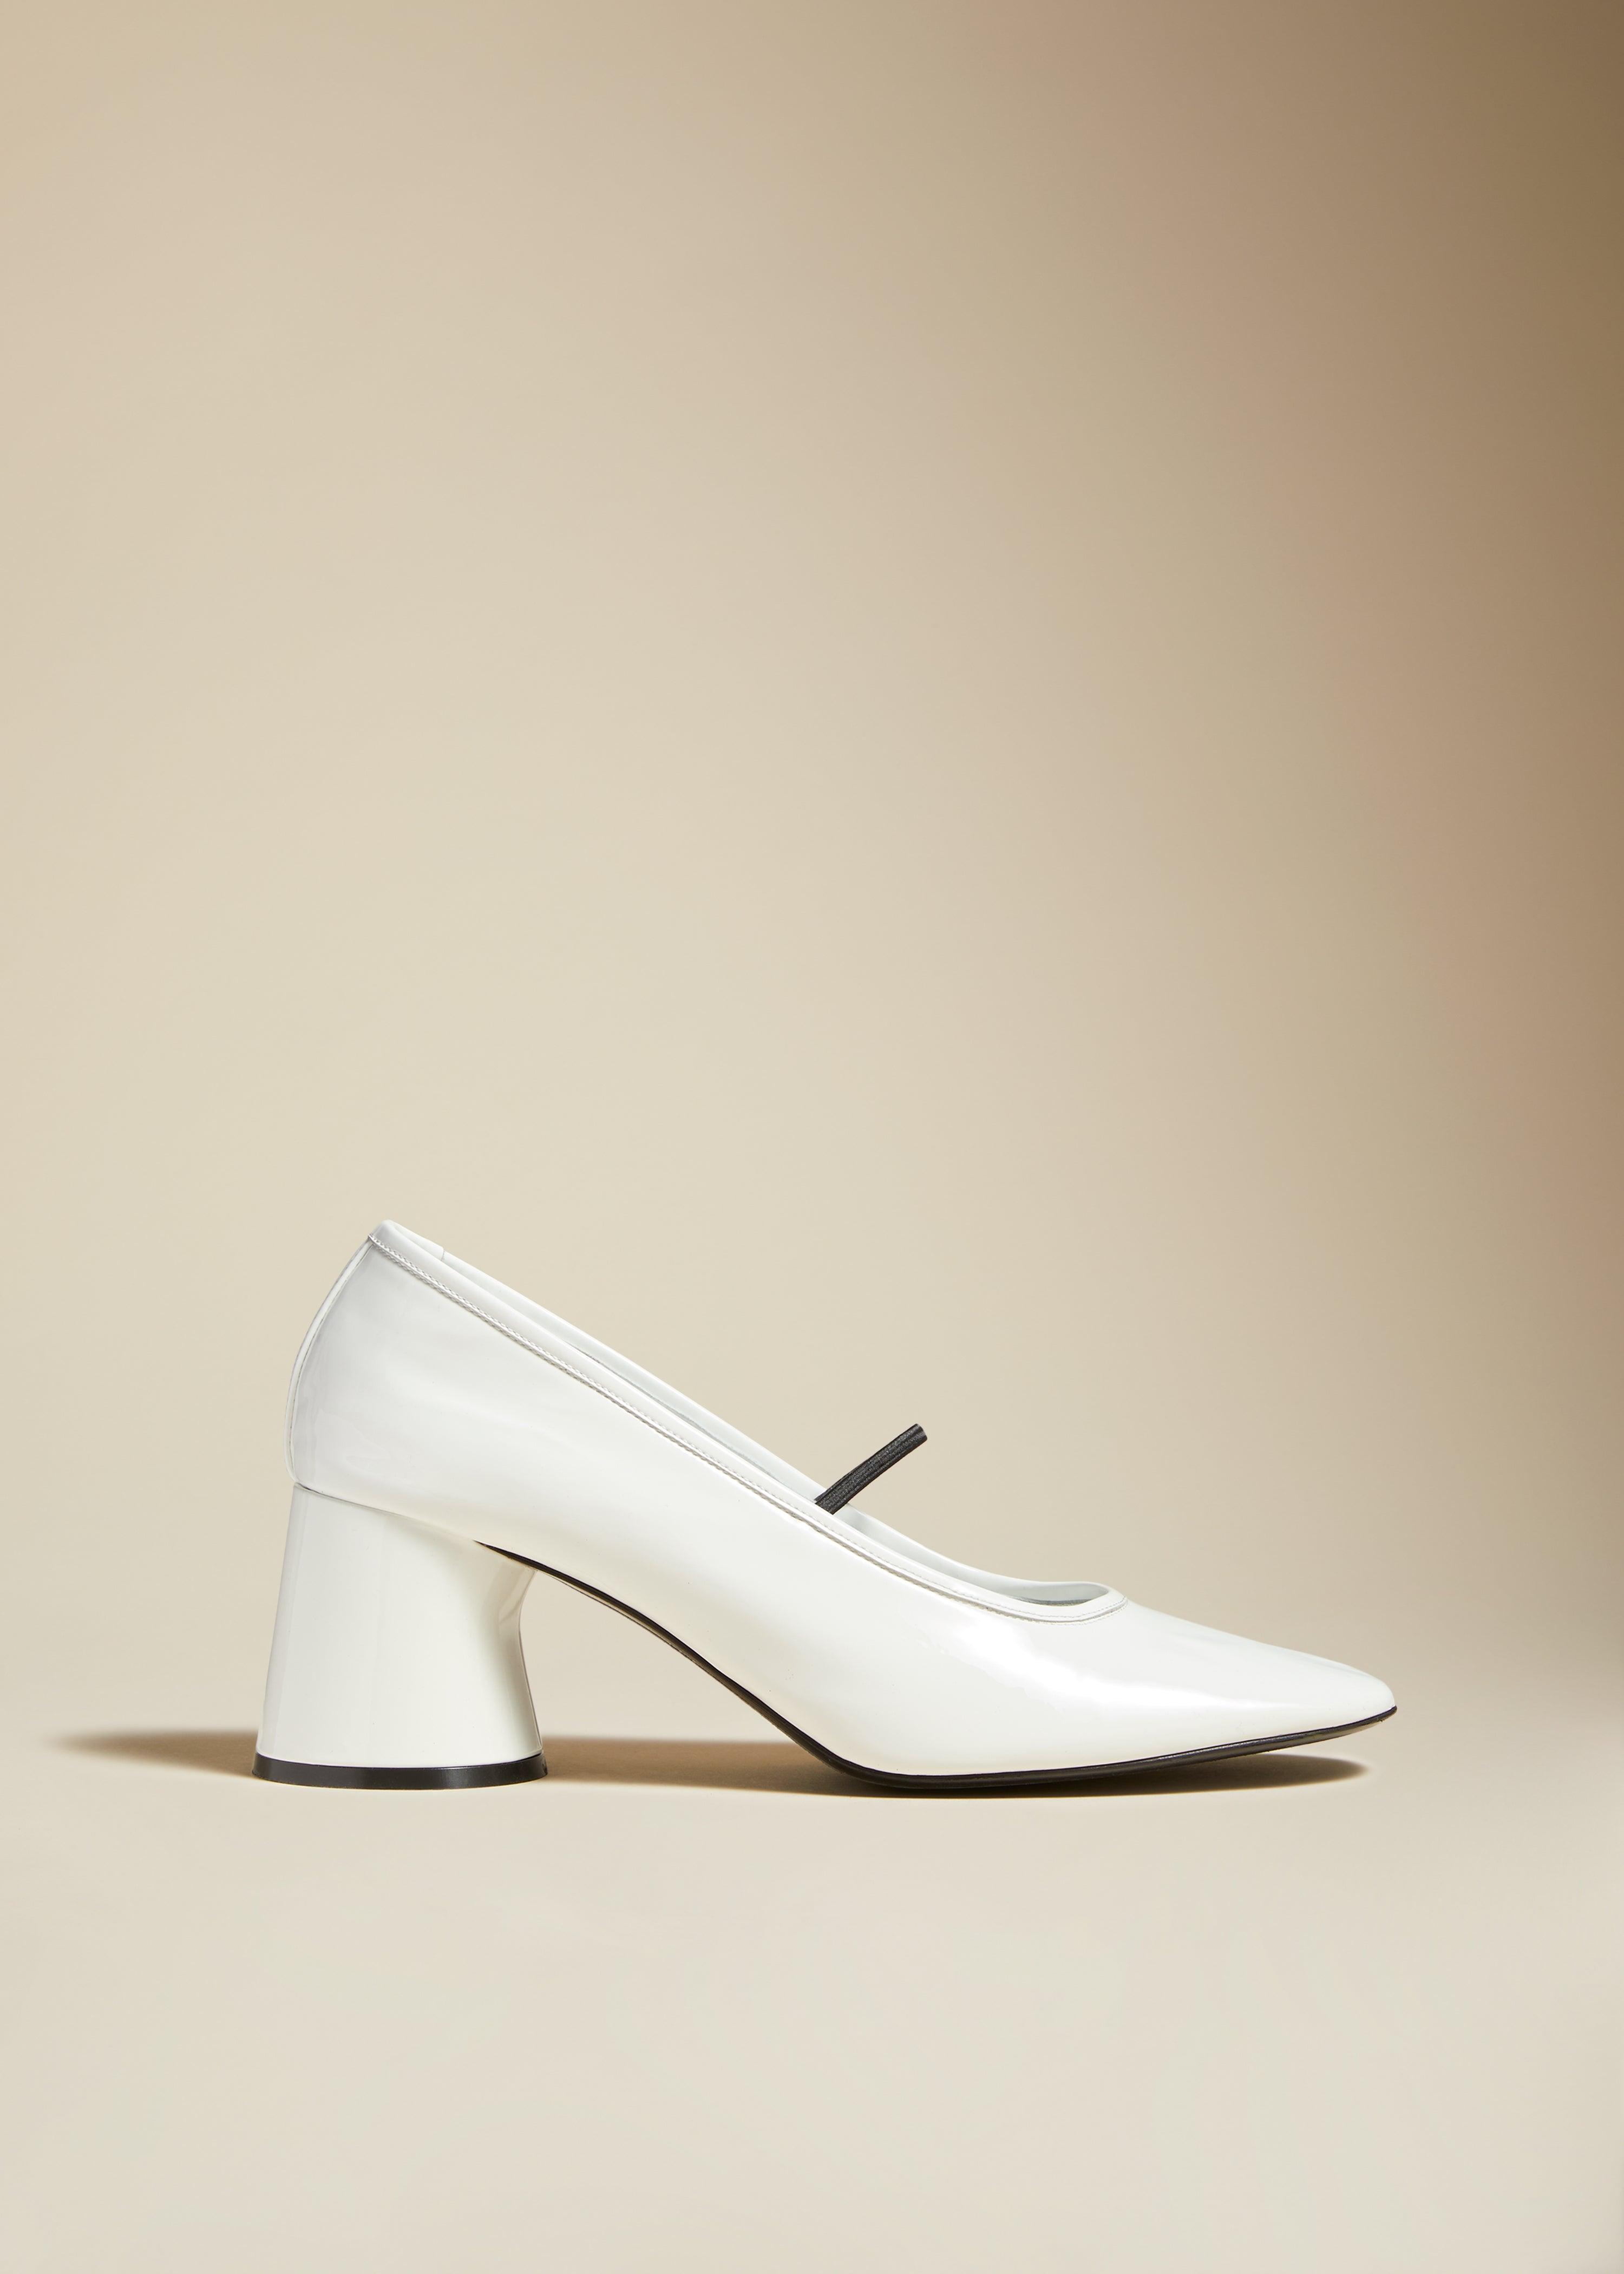 The Lorimer Pump in White Patent Leather - The Iconic Issue